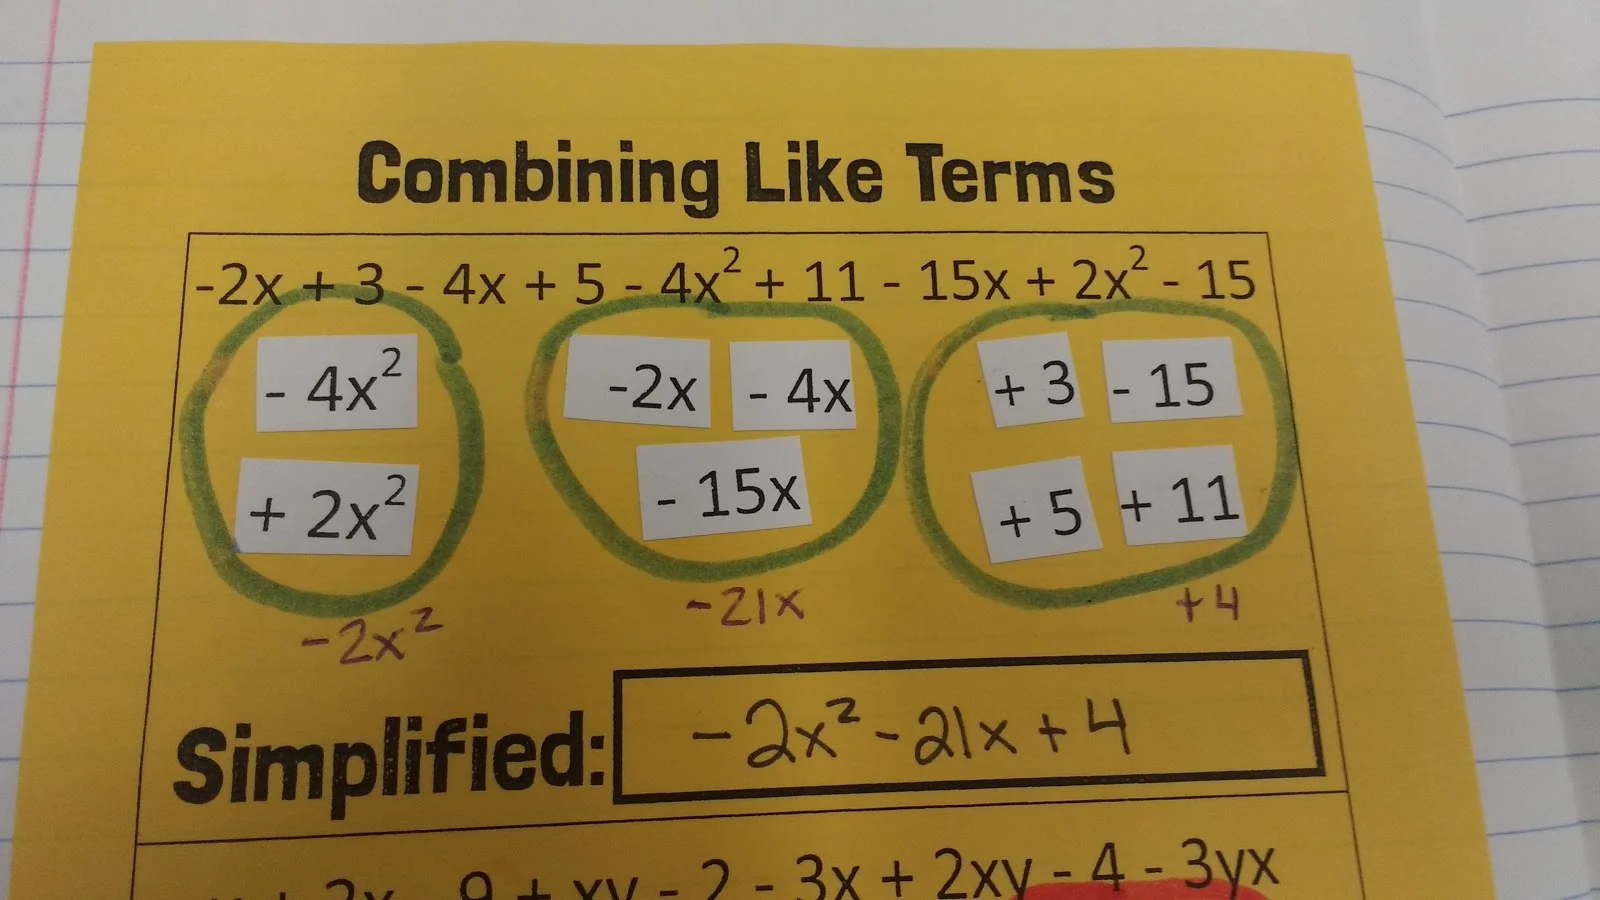 Combining Like Terms Cut and Paste Activity